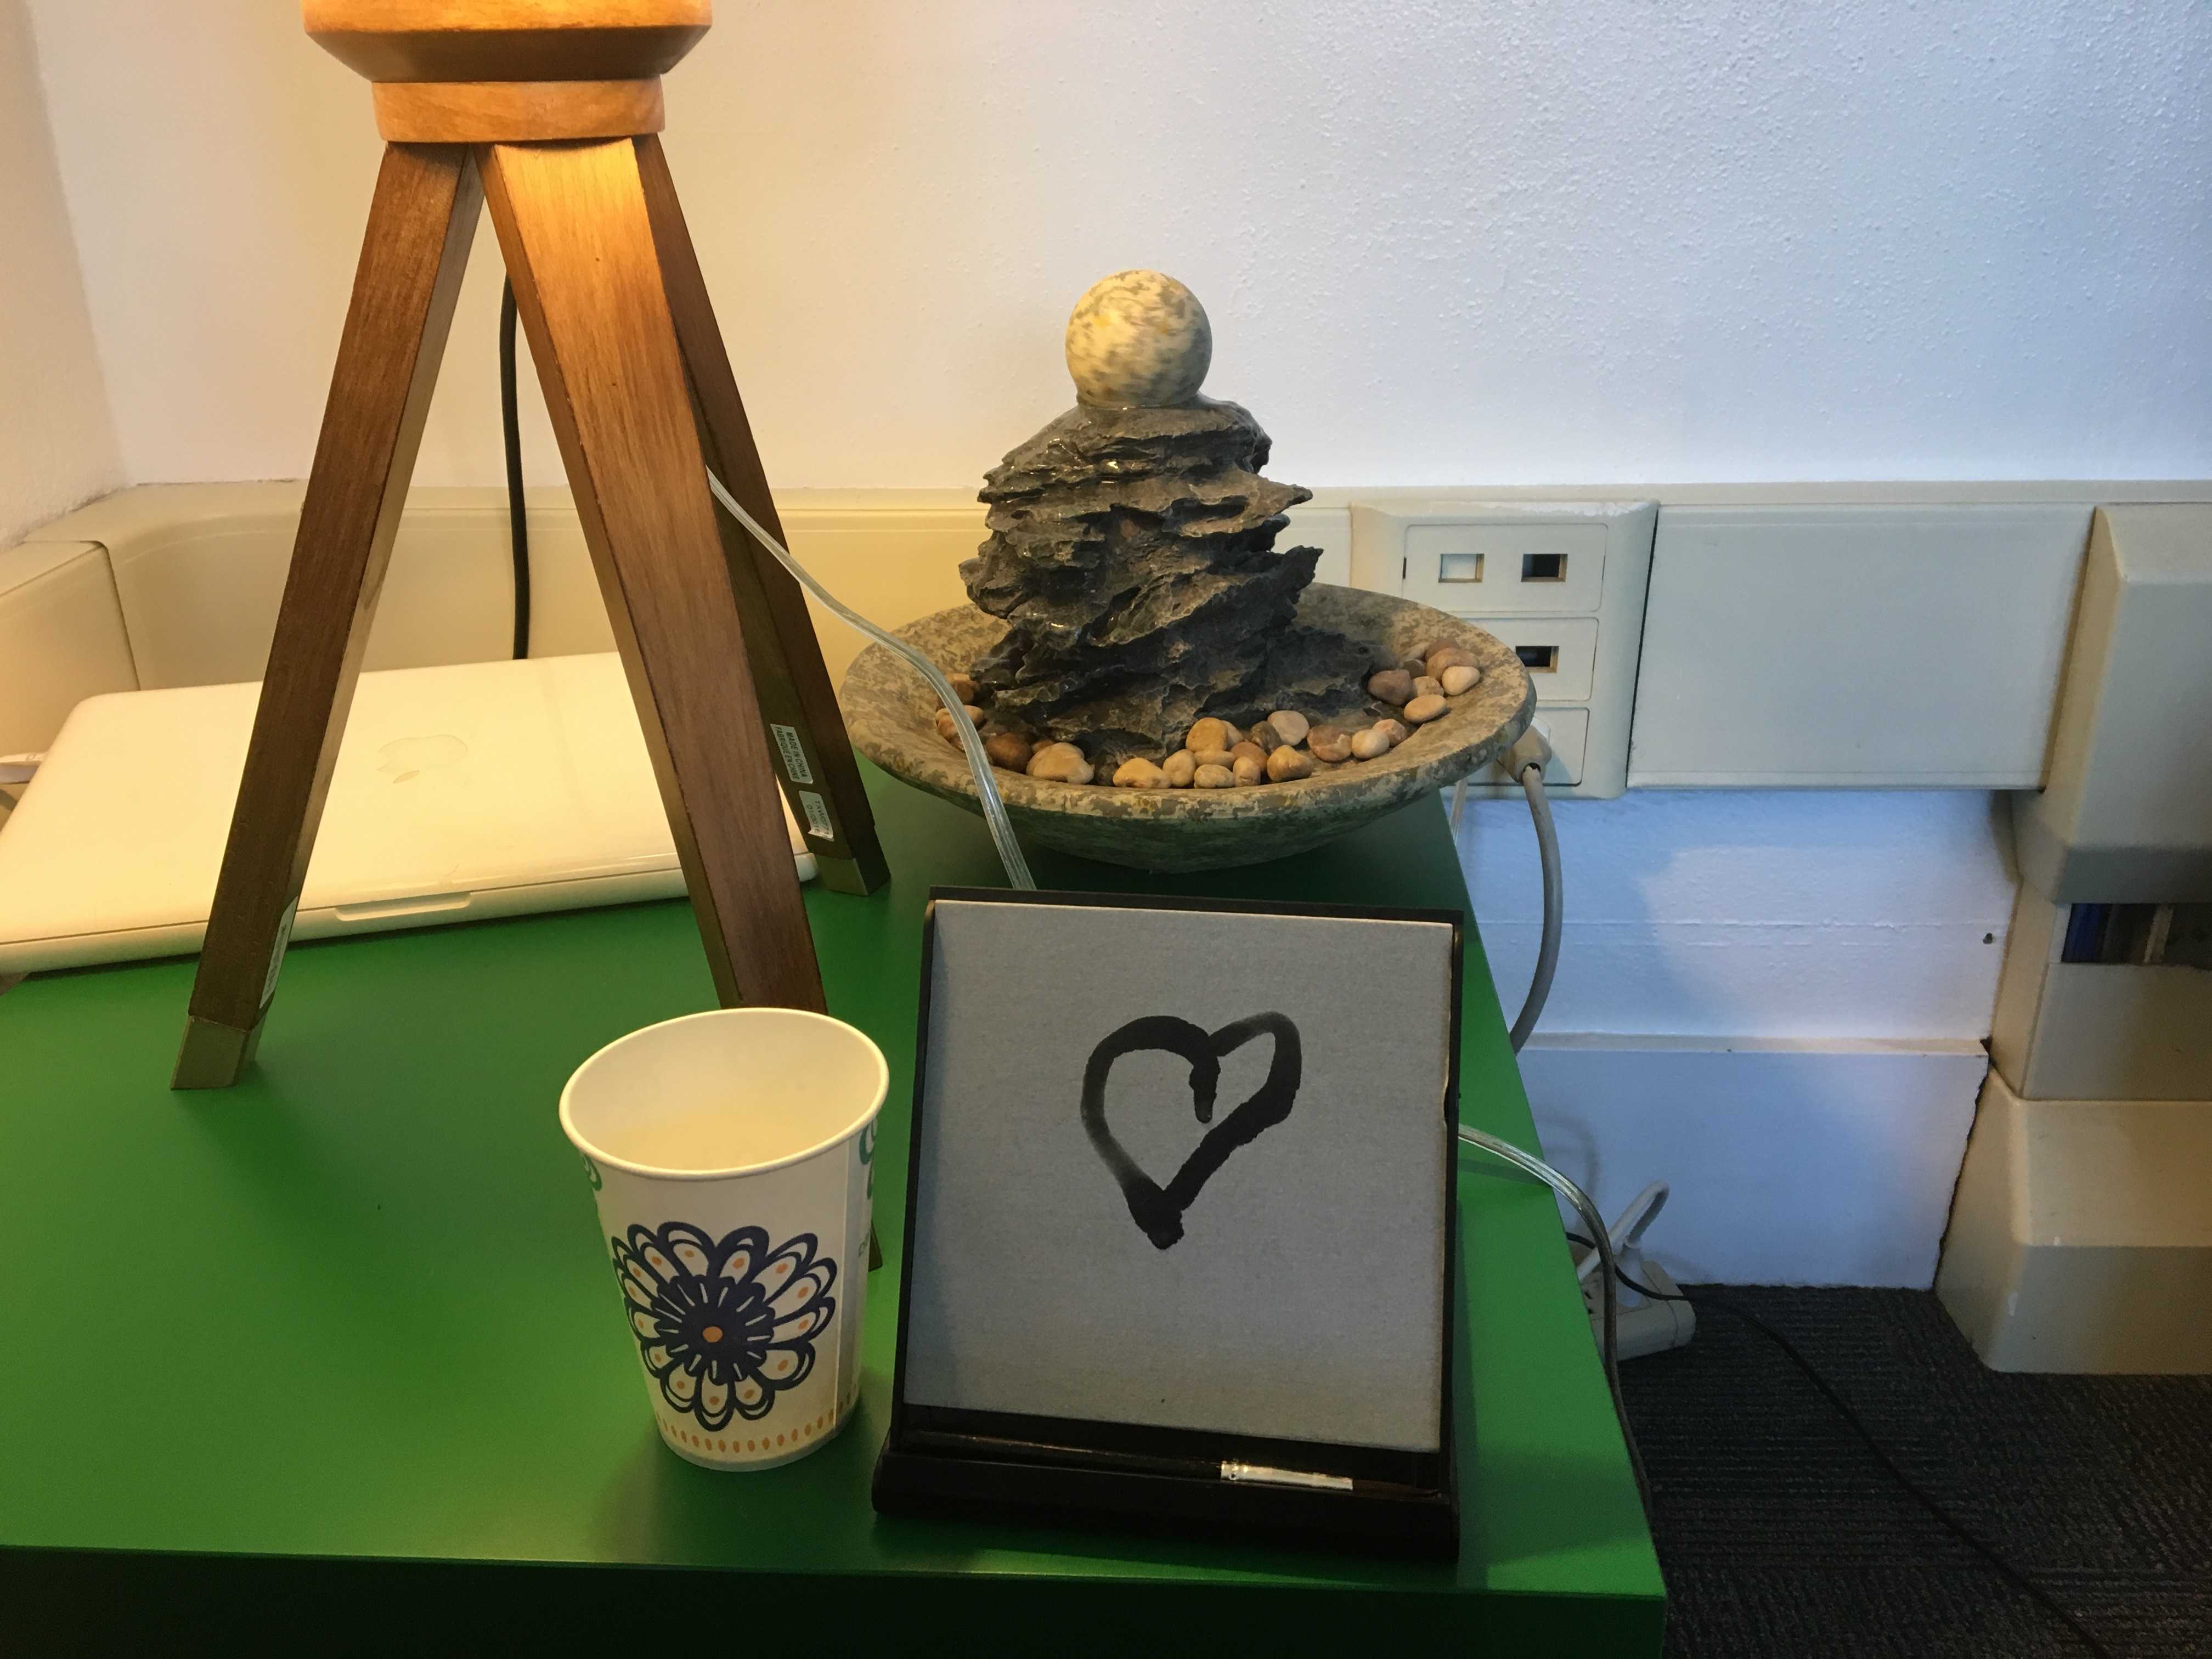 A calming fountain is set up on a side table, accompanied by a "Buddha board", where a student can draw a picture with water, and then see it slowly fade as the water dries. Spector explained why the Wellness Center decided to include it. “The board reminds us about living in the moment. It’s reinforcing that things aren’t permanent.” 